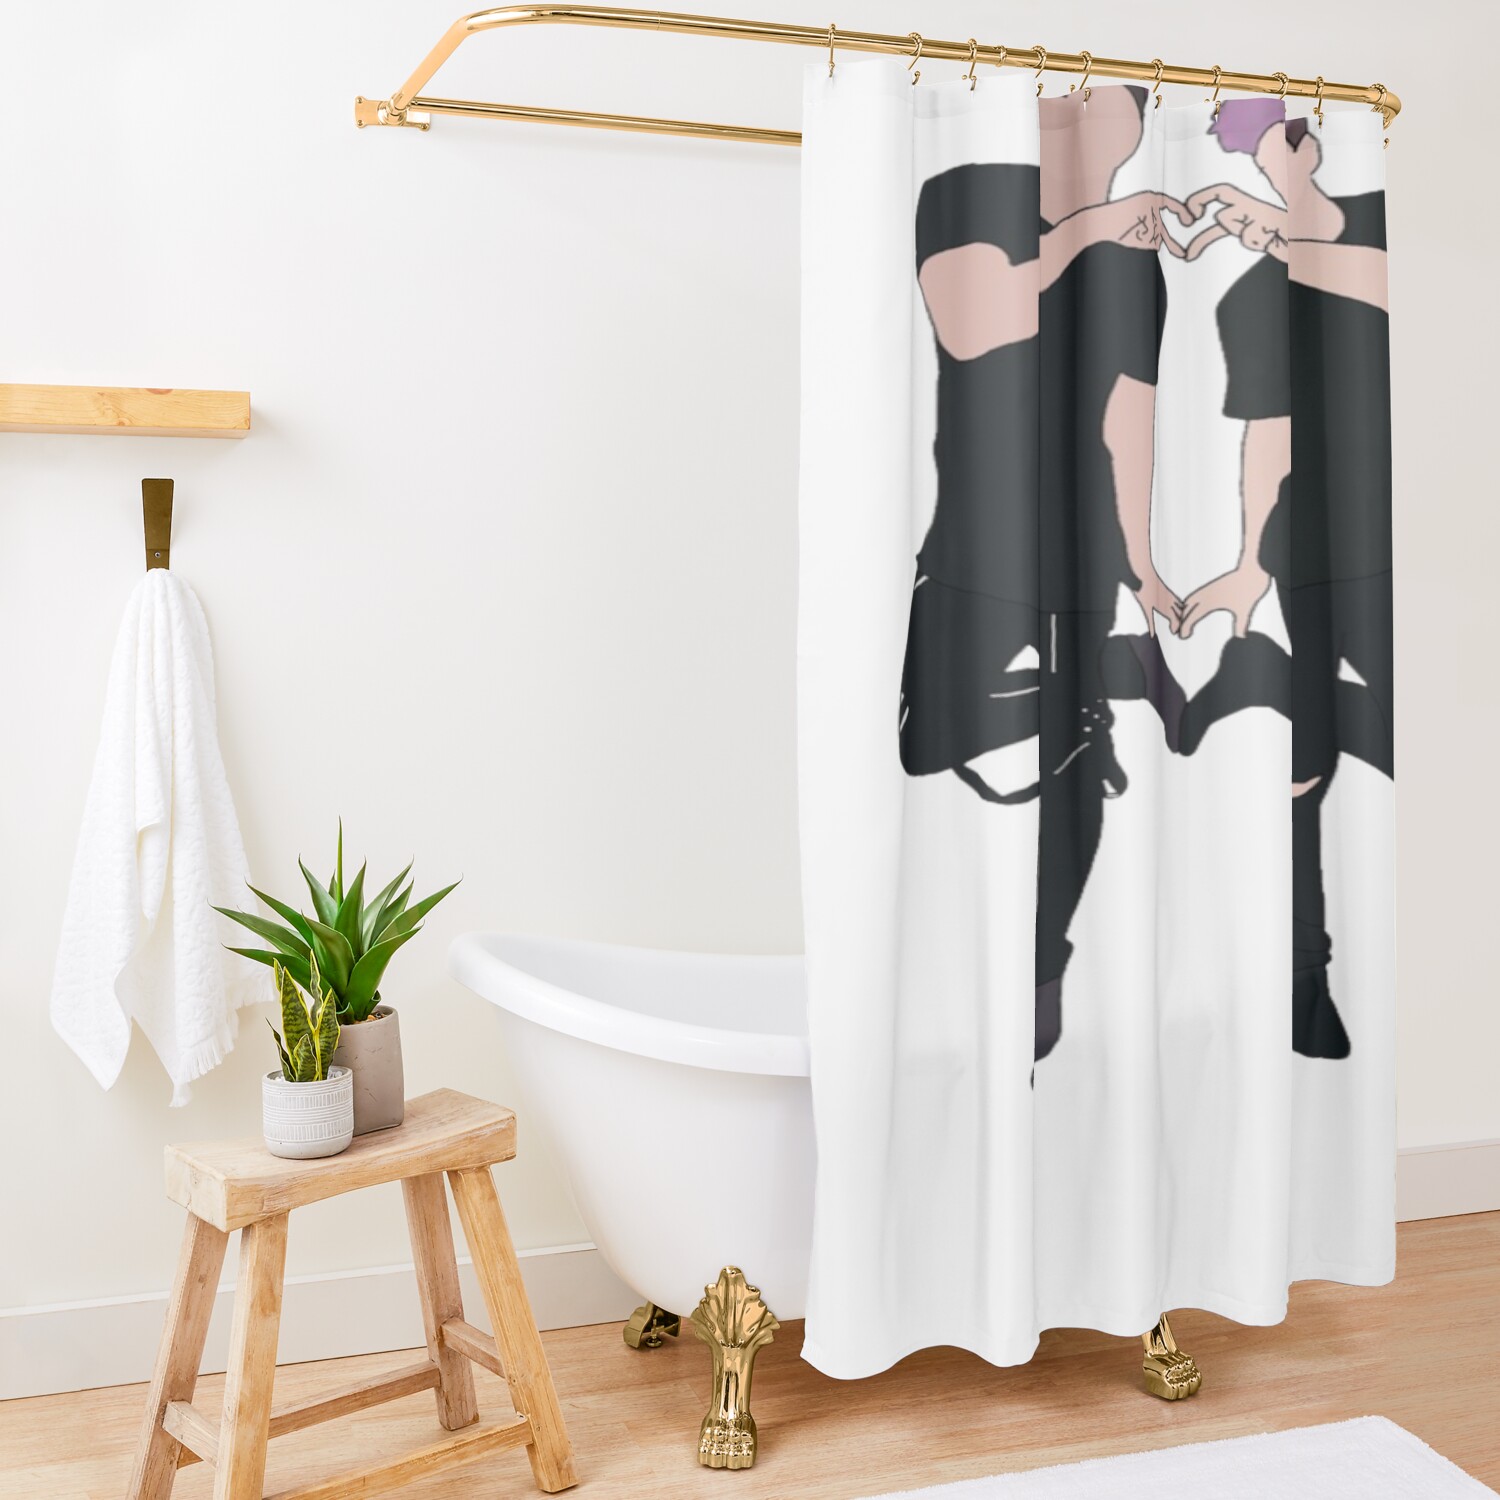 urshower curtain opensquare1500x1500 1 - Sam And Colby Shop